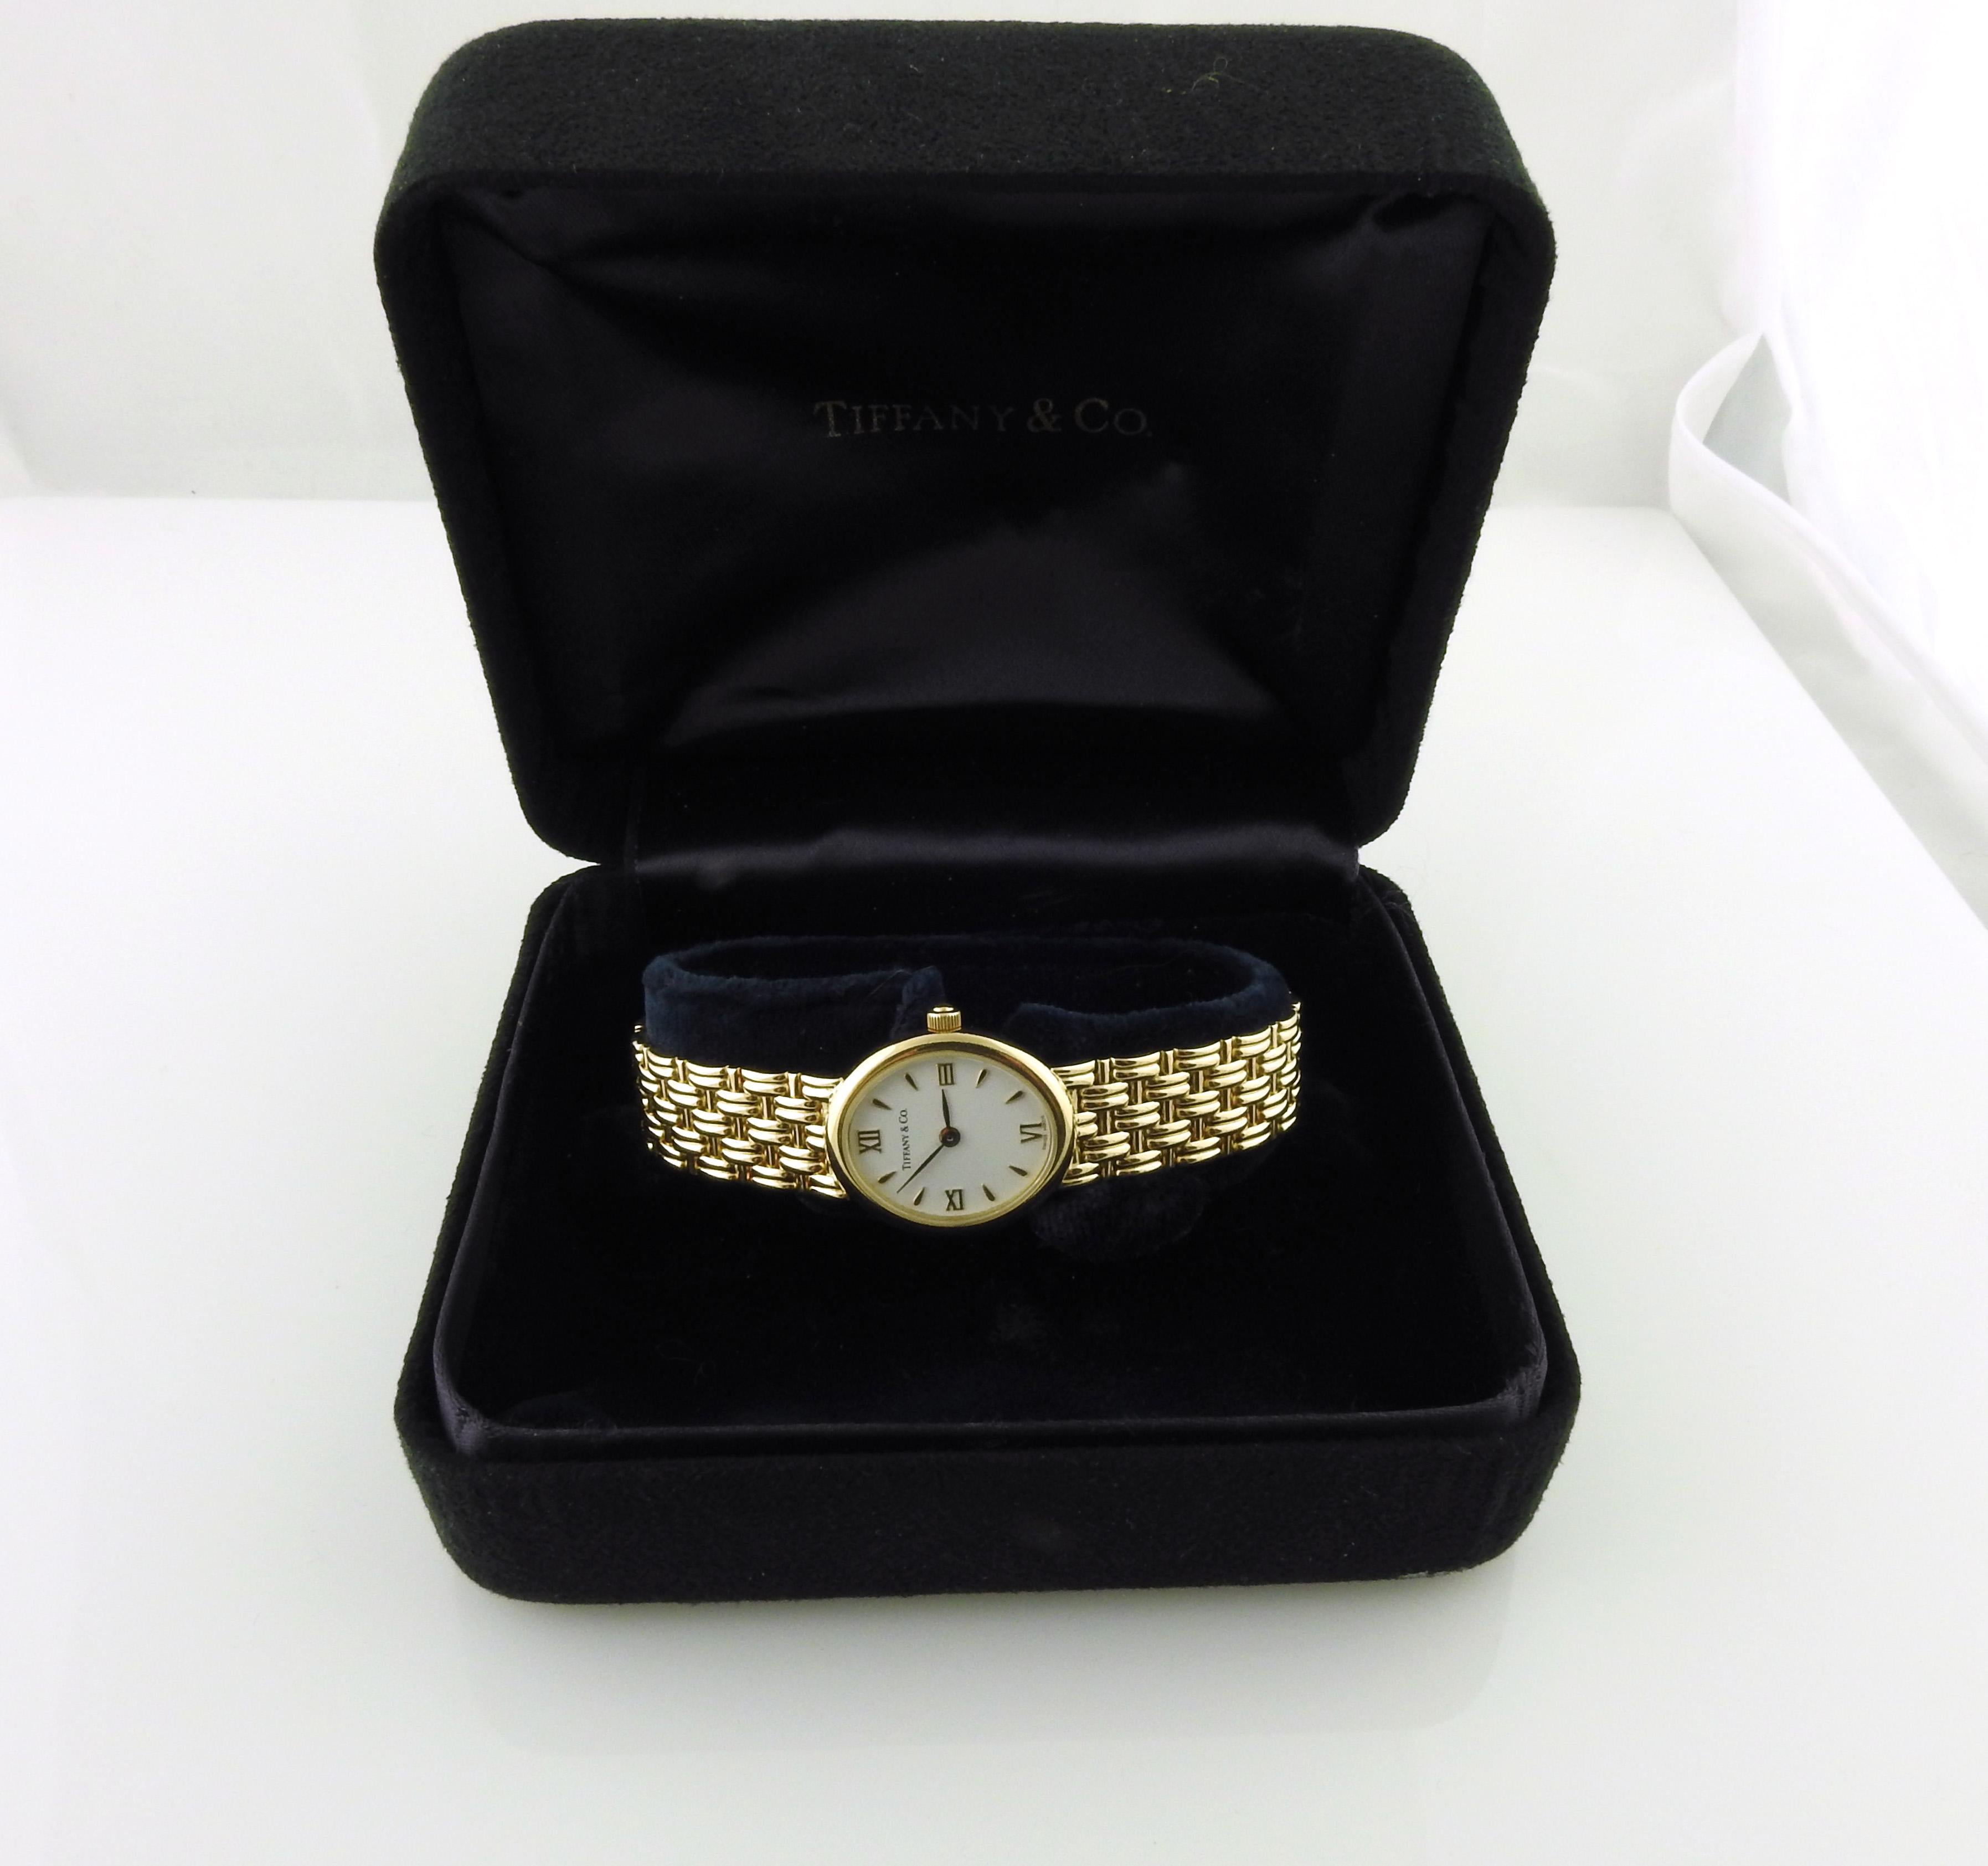 Tiffany & Co. 18k Yellow Gold Ladies Watch White Dial Basket Weave Band 5